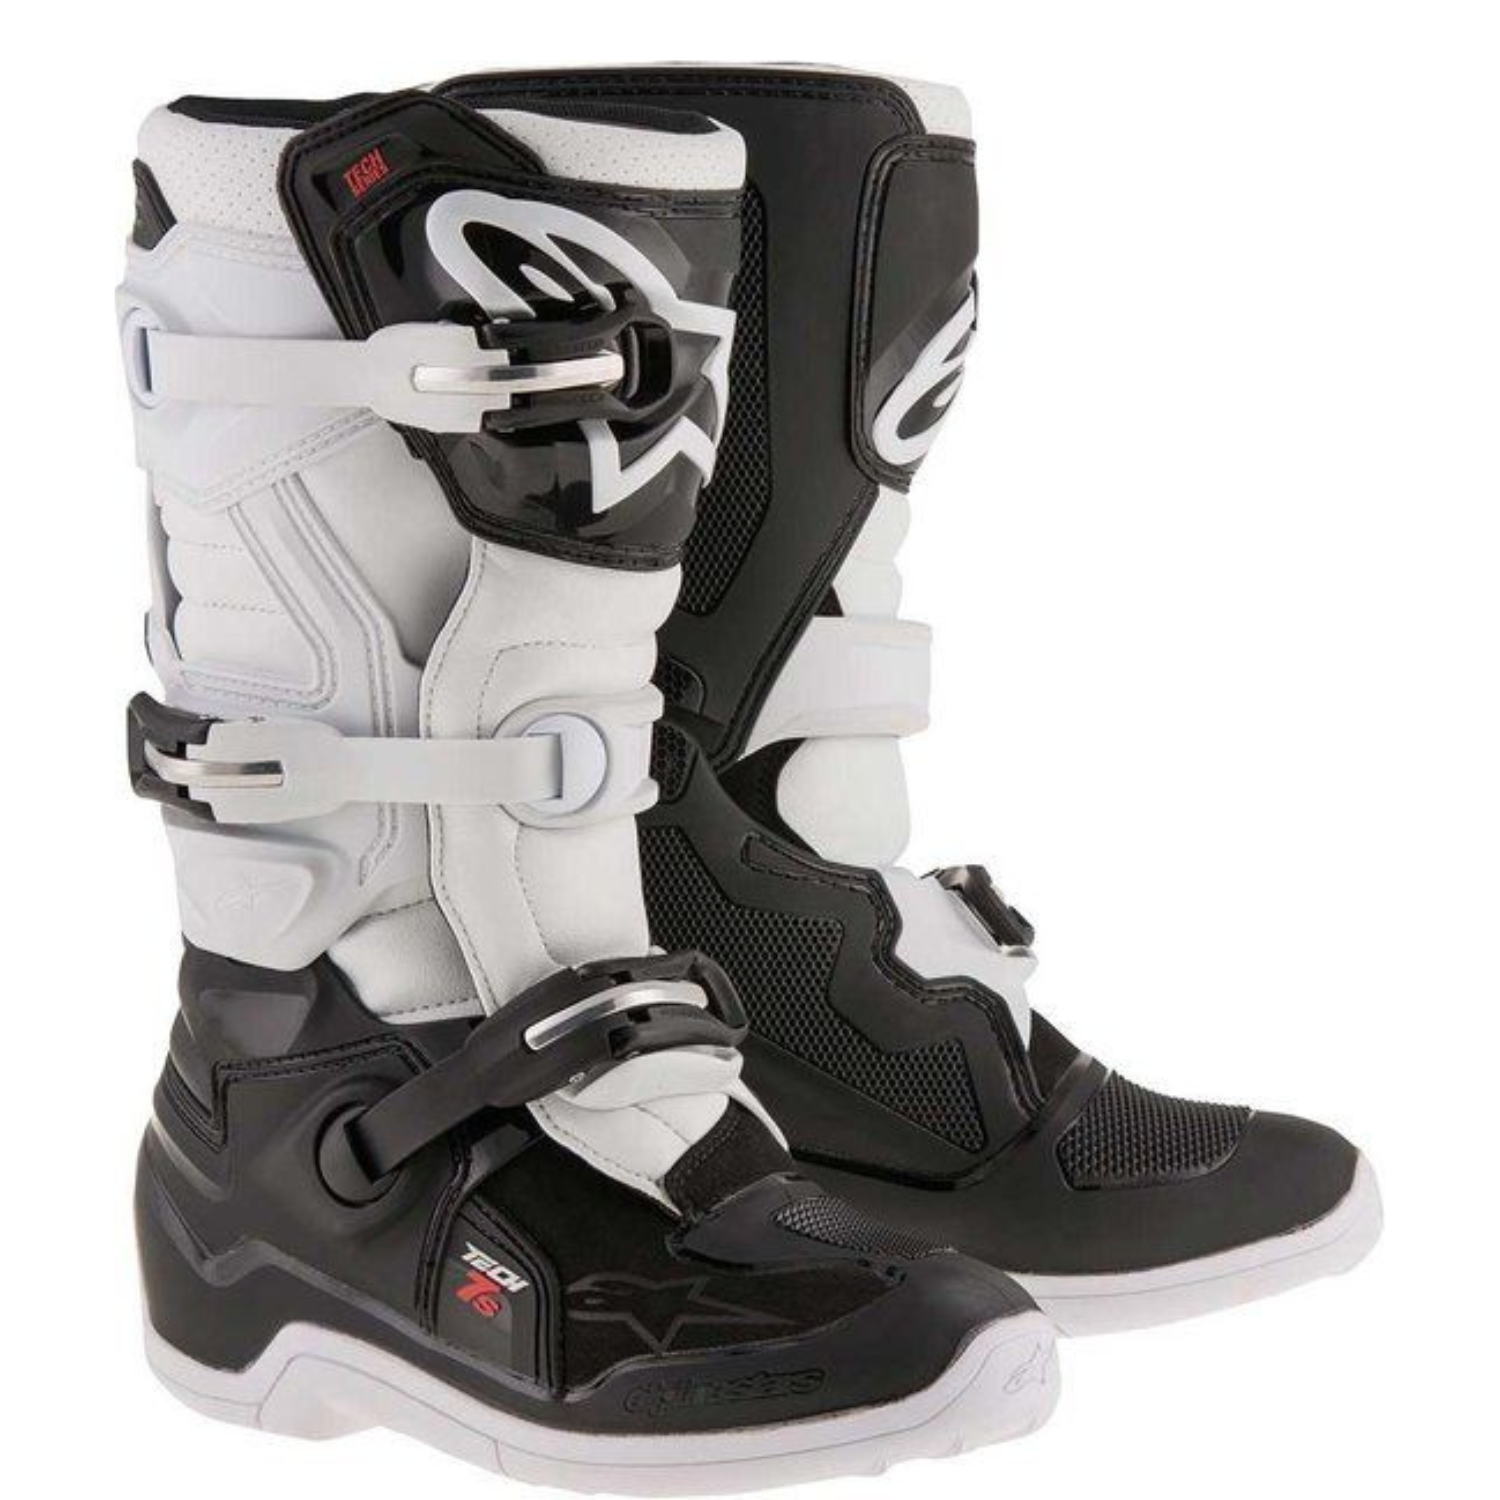 Image of Alpinestars Tech 7 S Black White Boots Taille US 5